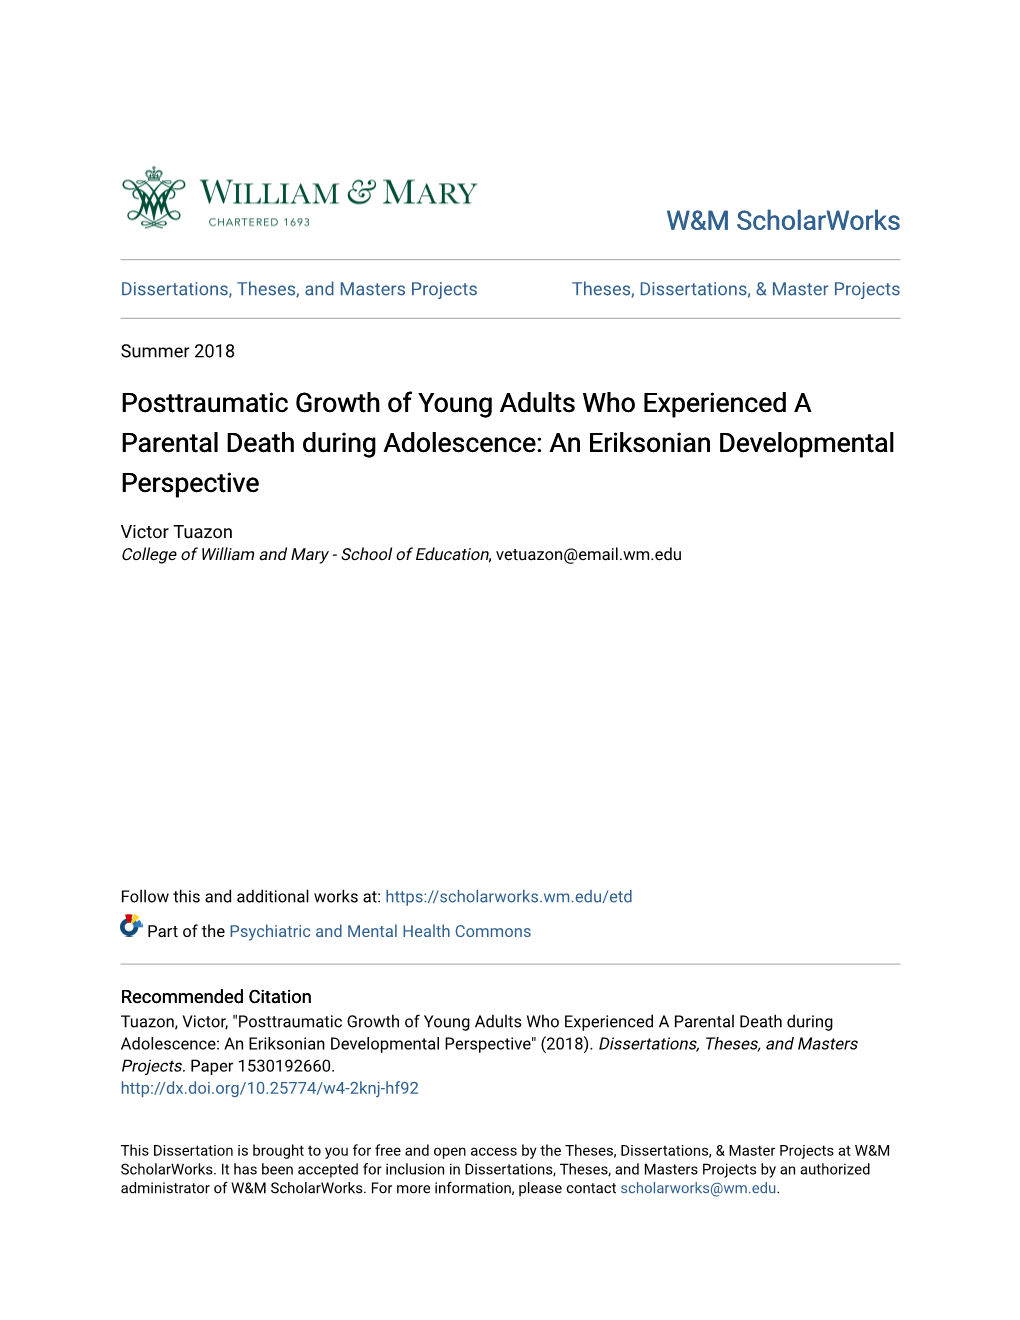 Posttraumatic Growth of Young Adults Who Experienced a Parental Death During Adolescence: an Eriksonian Developmental Perspective